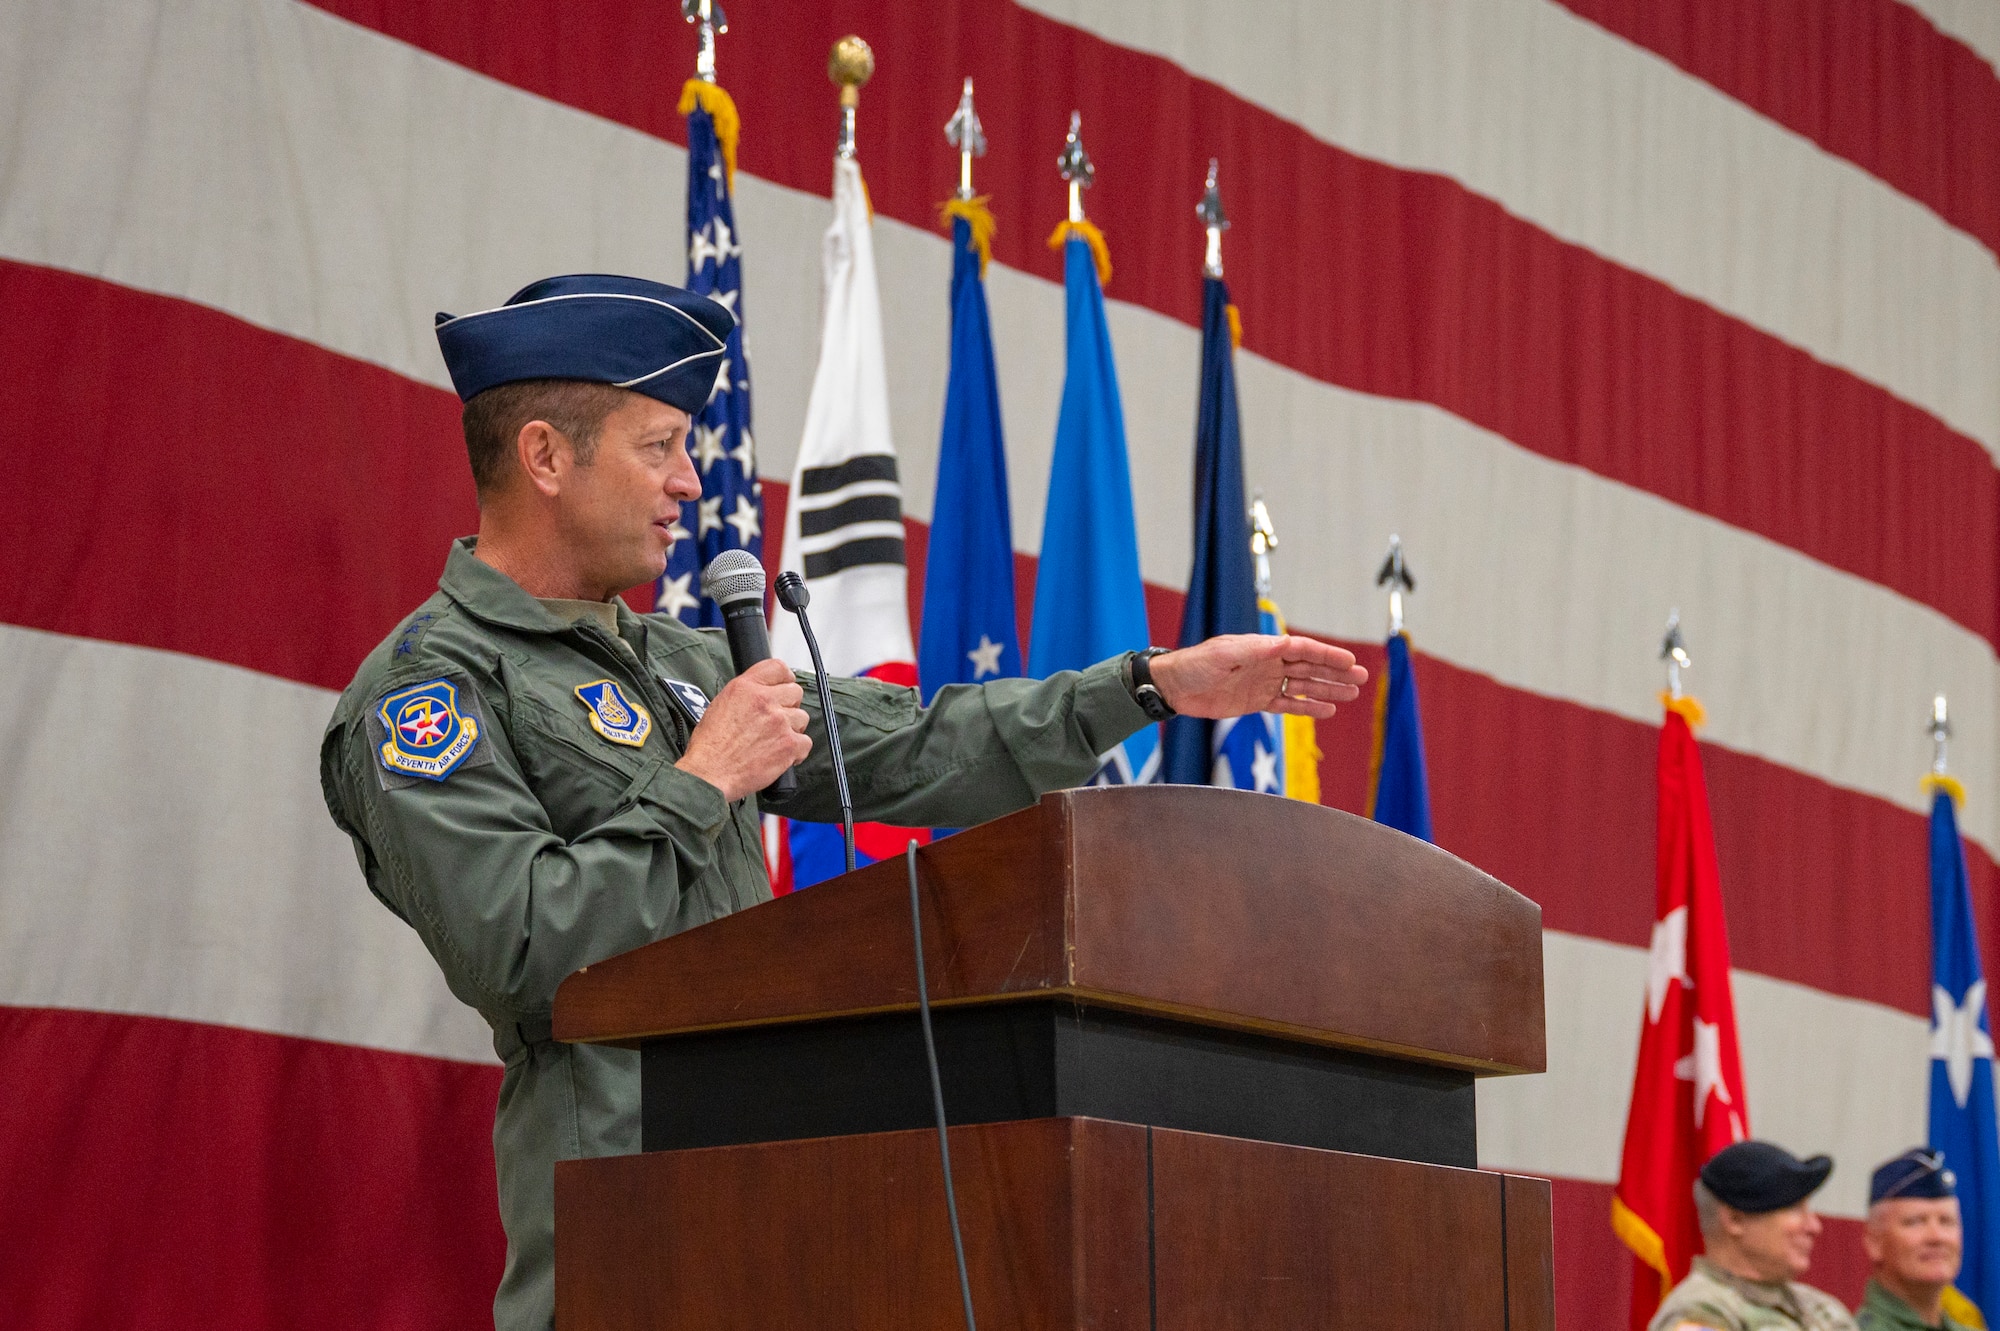 U.S. Air Force Lt. Gen. David Iverson gestures while speaking behind a podium during the Seventh Air Force change of command ceremony, at Osan Air Base, Republic of Korea.